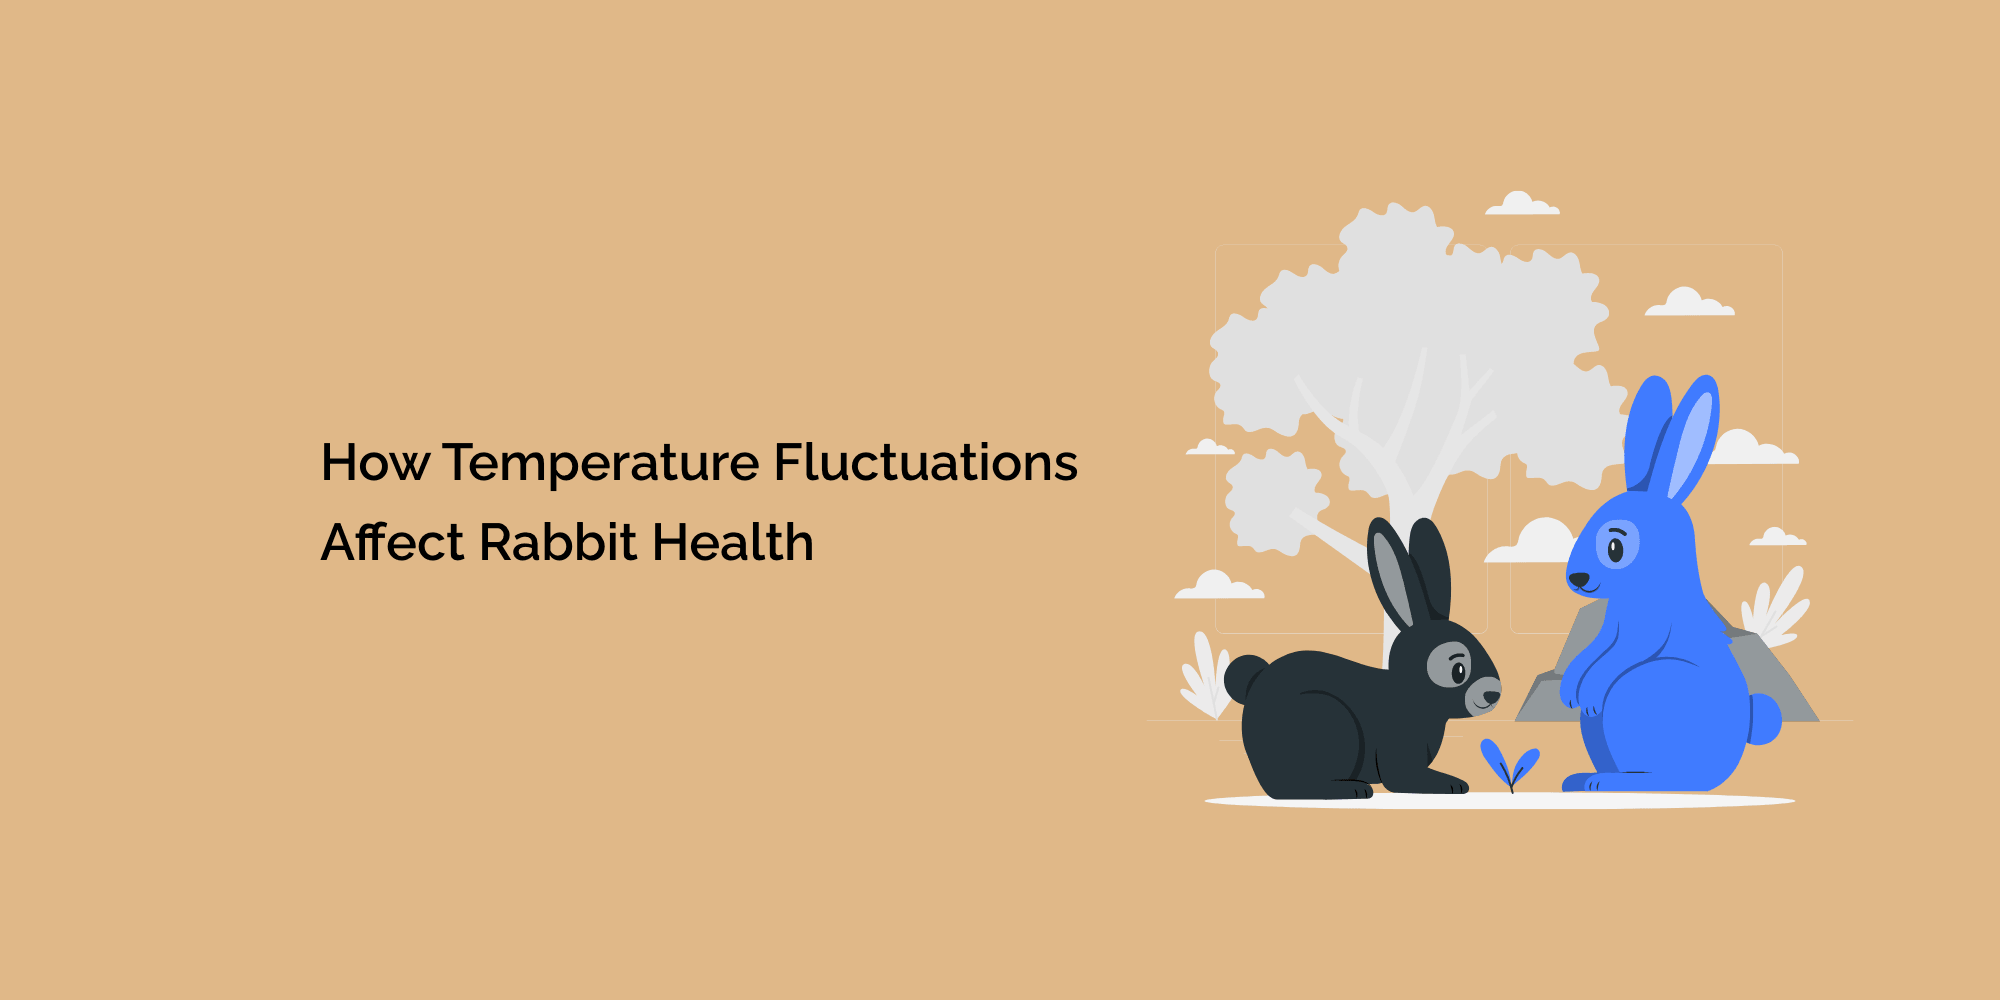 How Temperature Fluctuations Affect Rabbit Health